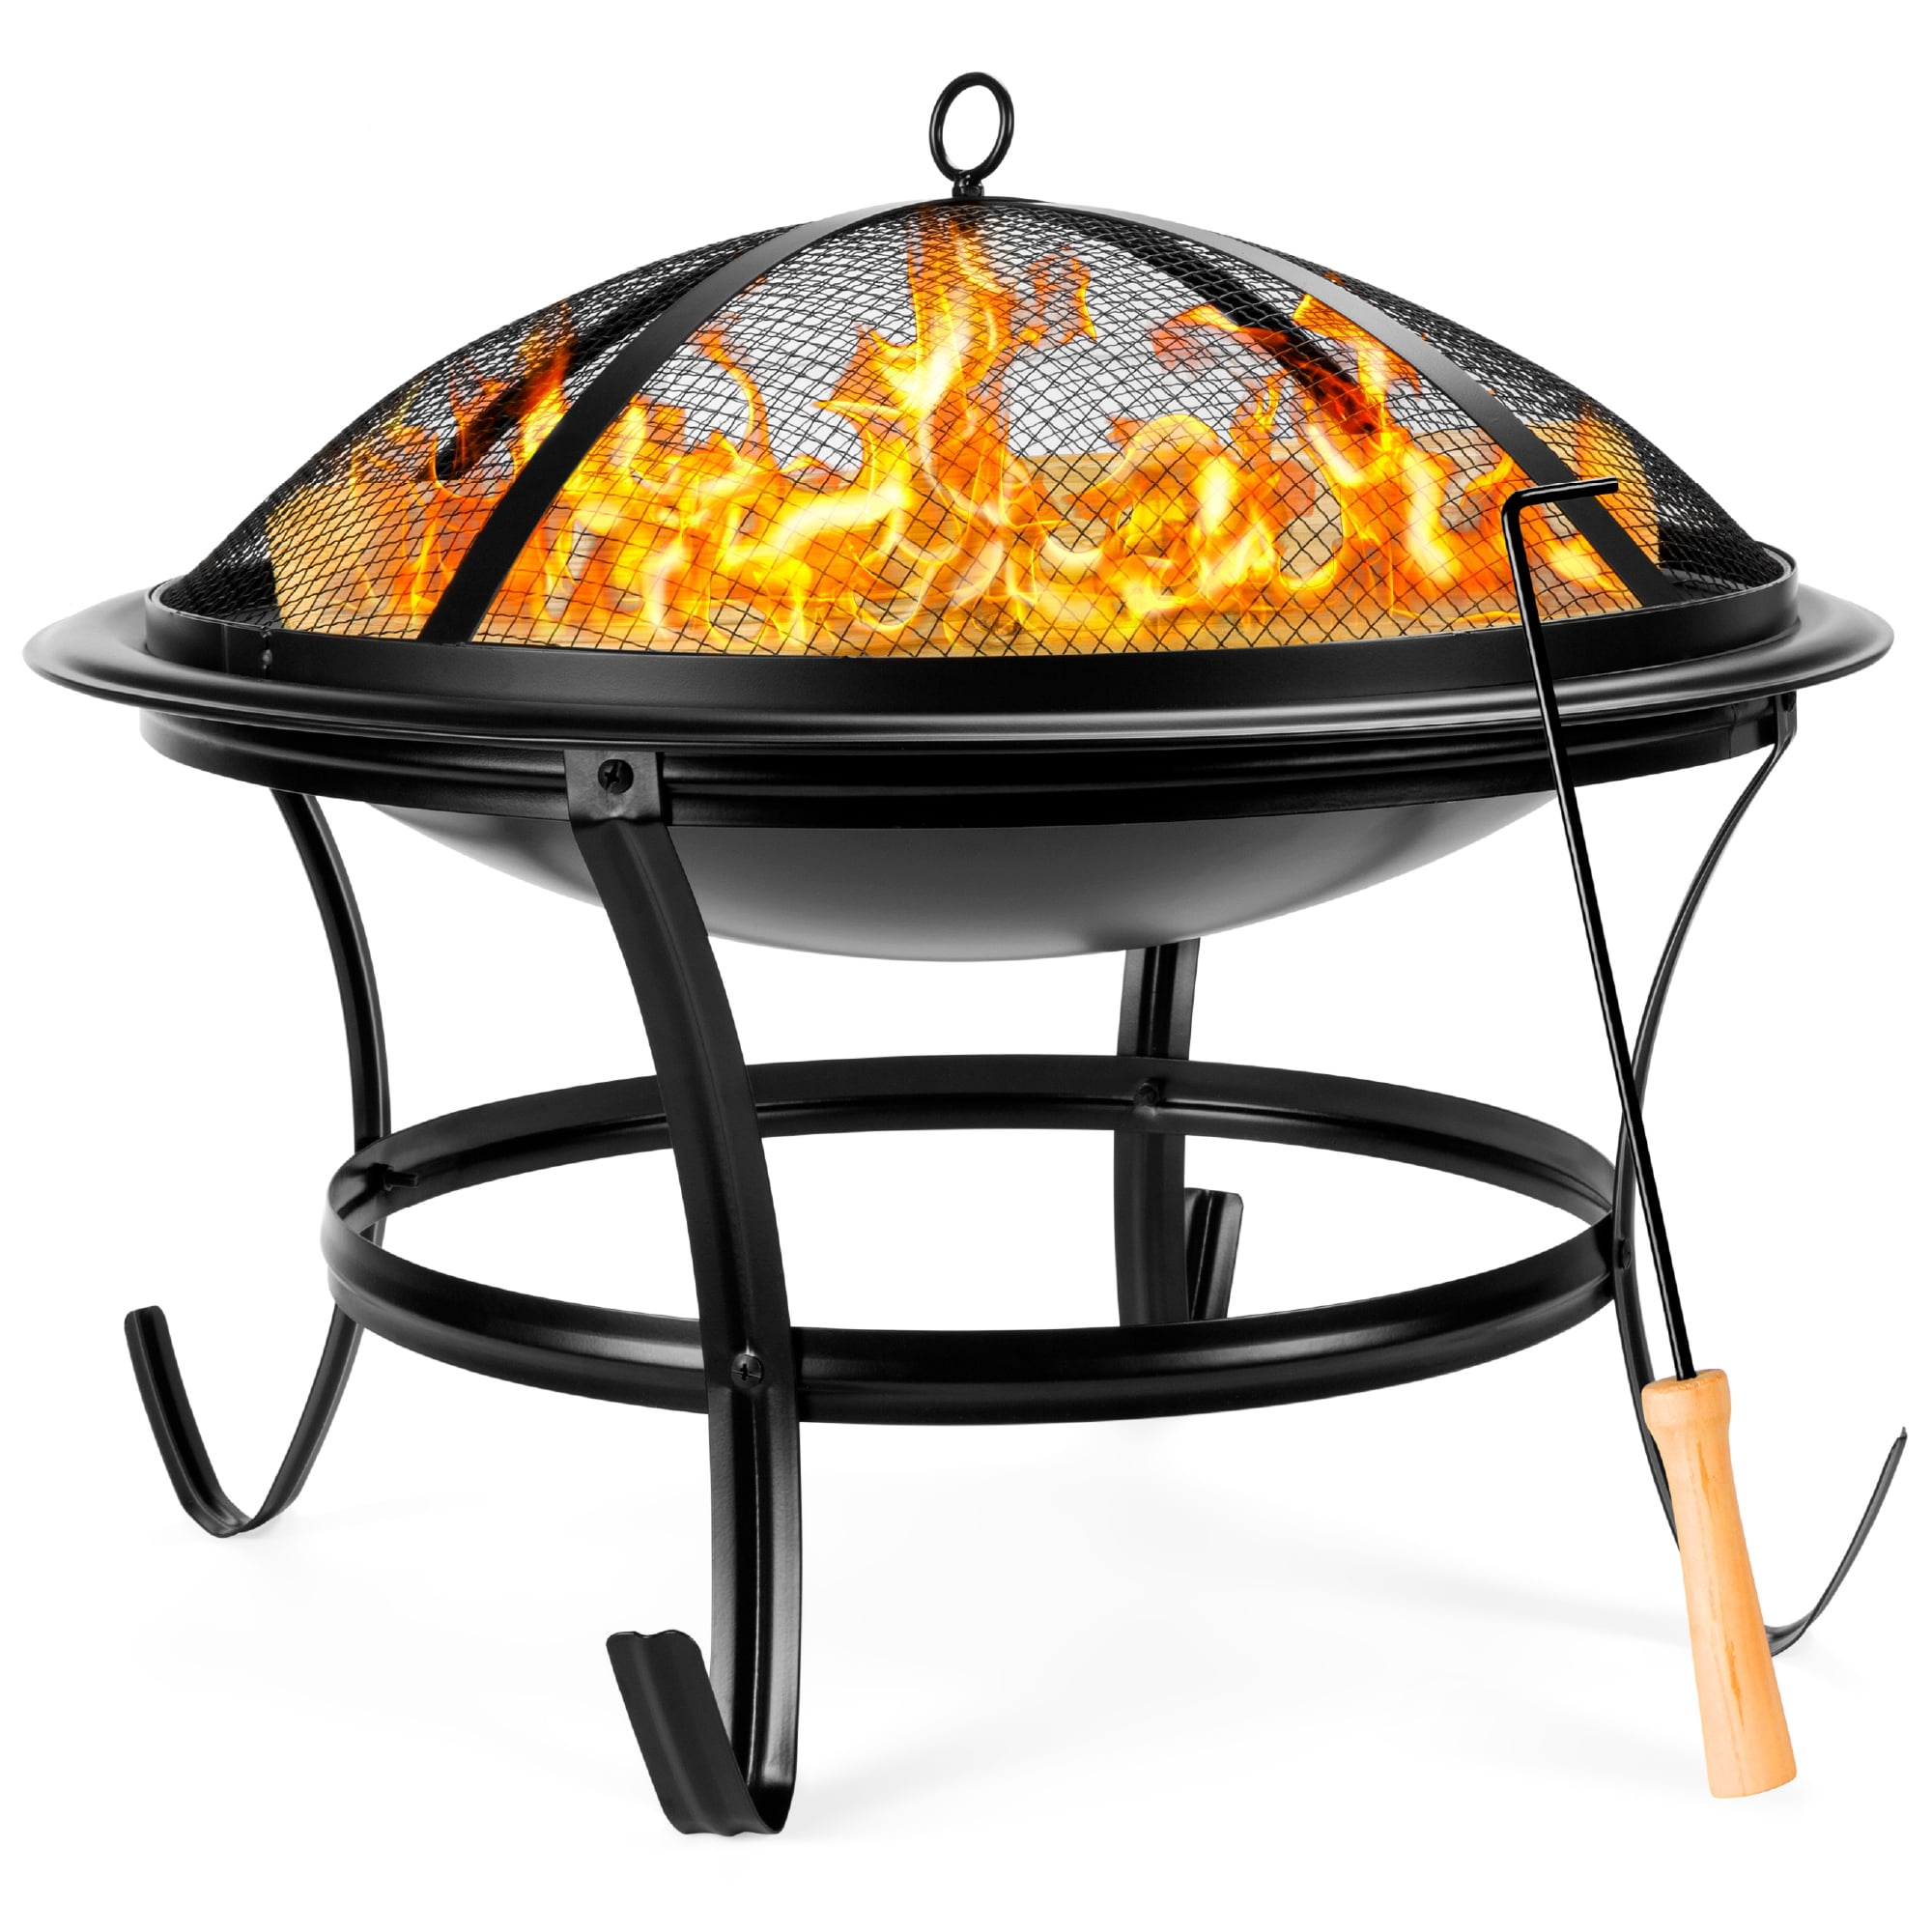 Backyards,Included Carrying Bag Outdoor Fire Pits Upgrade Foldable Fire Pits 22 Inch Camping Stainless Steel Mesh Fireplace,Foldable Fire Pit For Outdoor Camping Patio